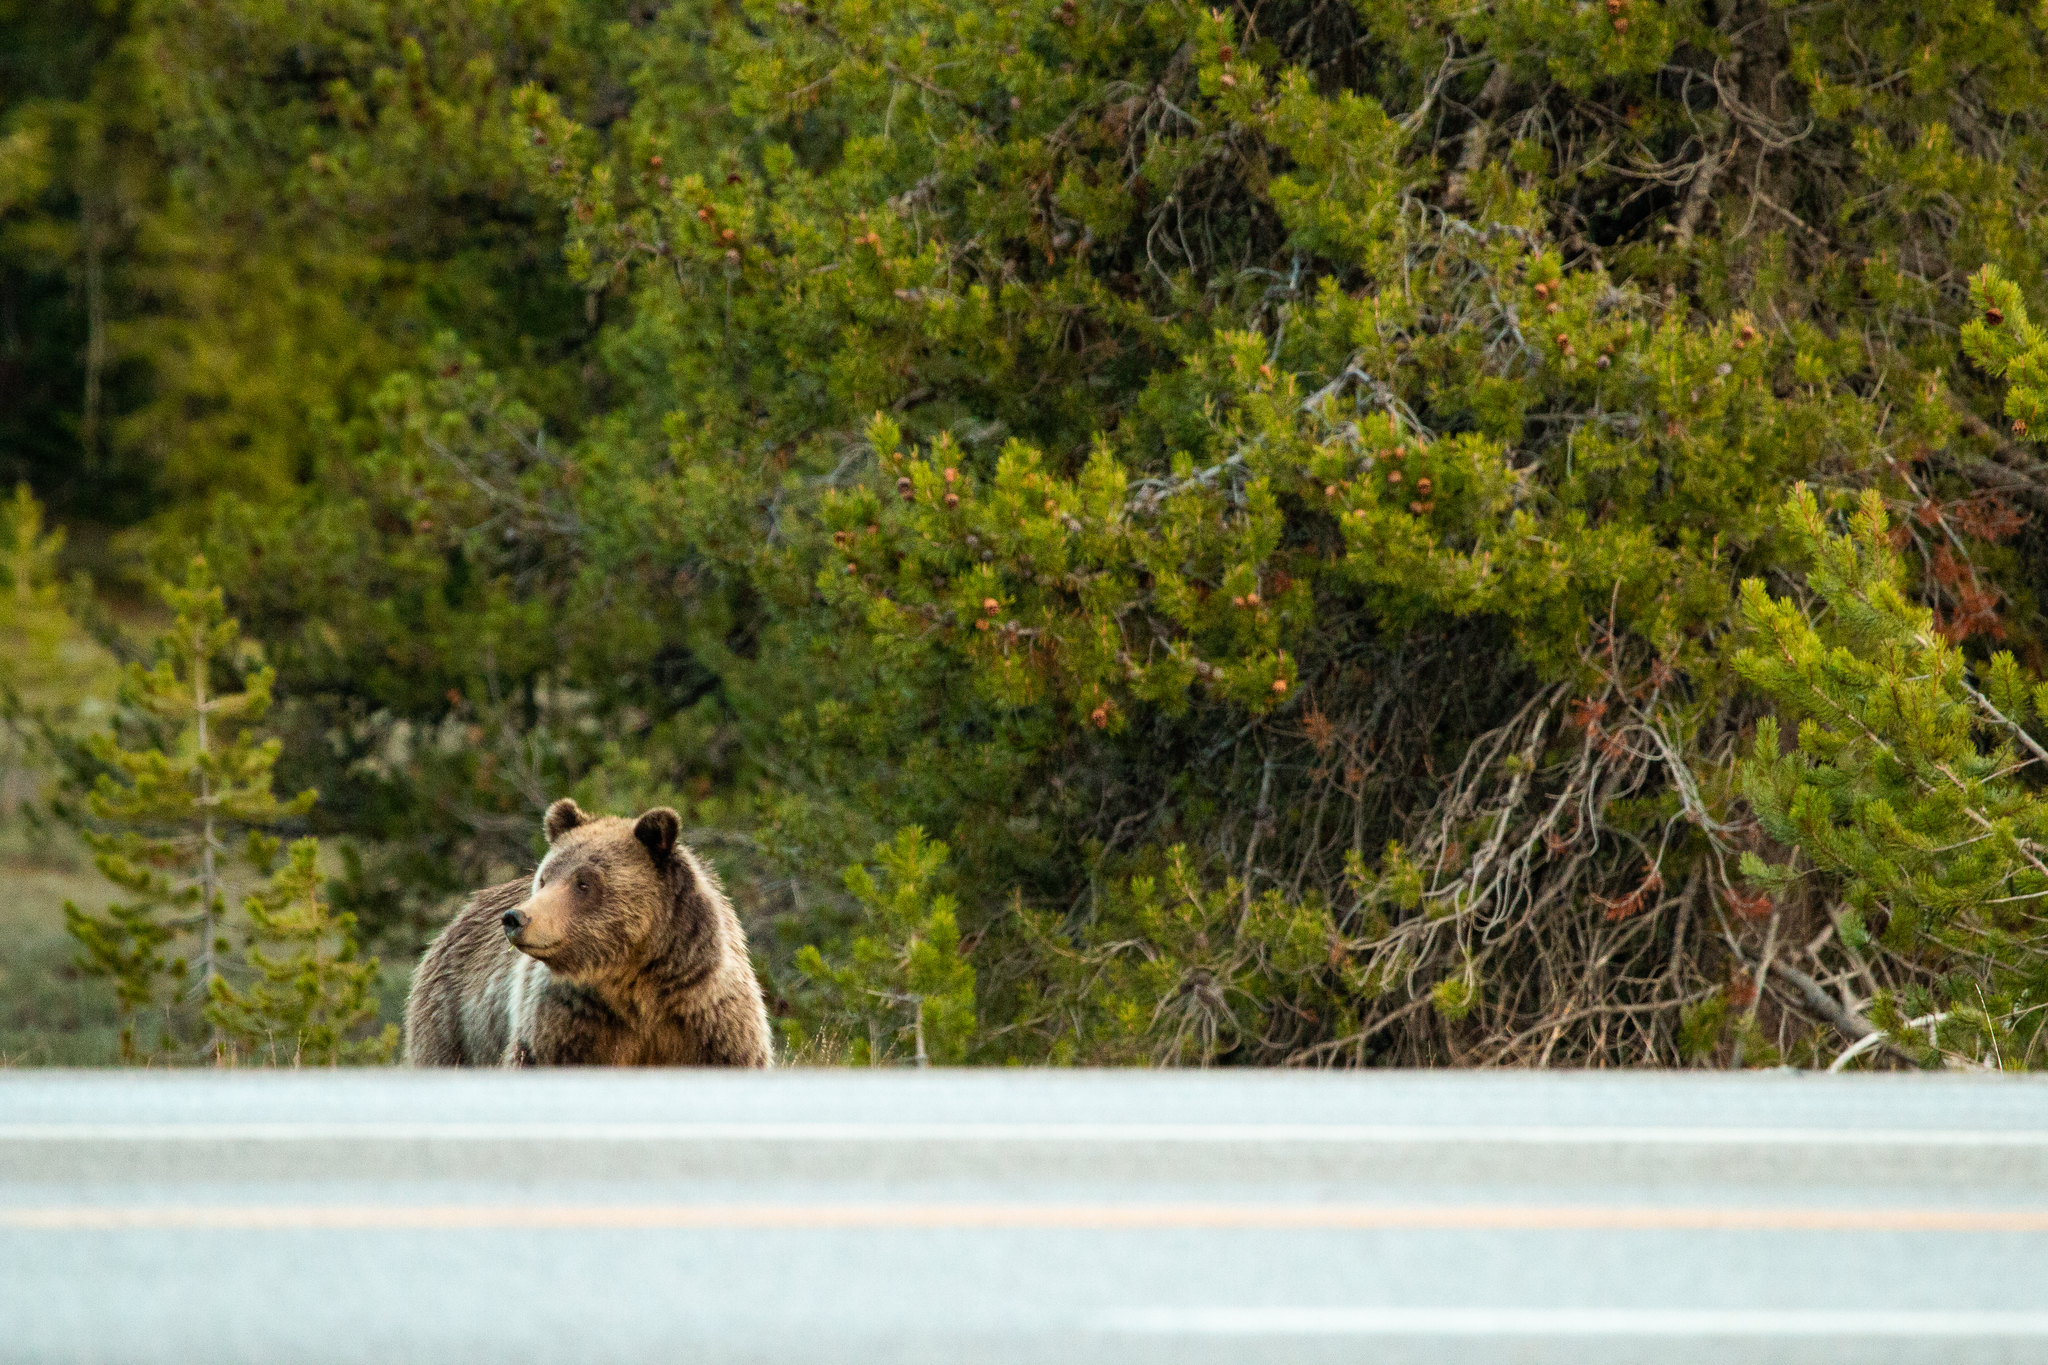 Problem bears in grizzly country are a byproduct of expanding bear populations